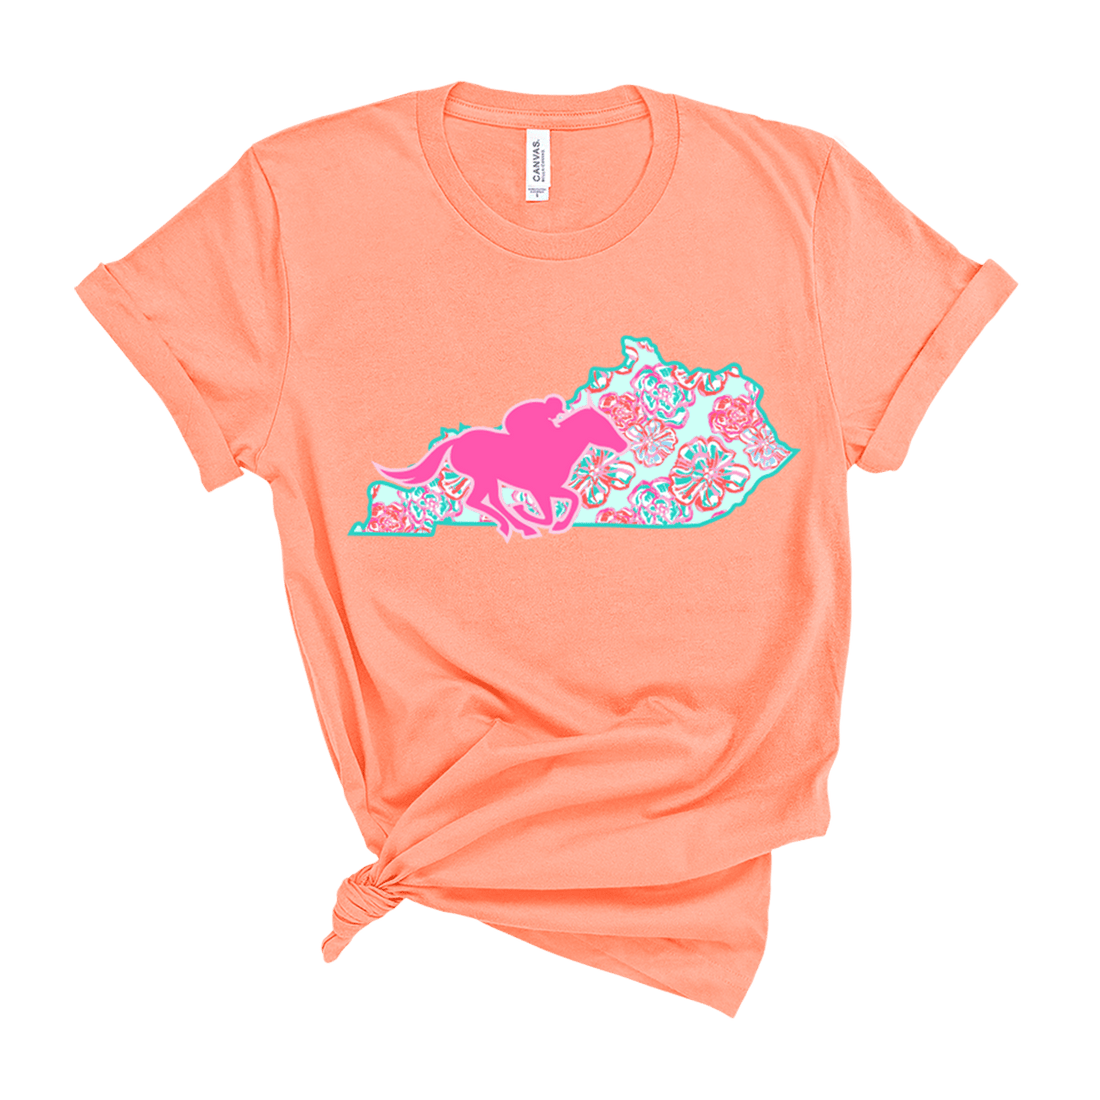 Run for the Roses T-Shirt